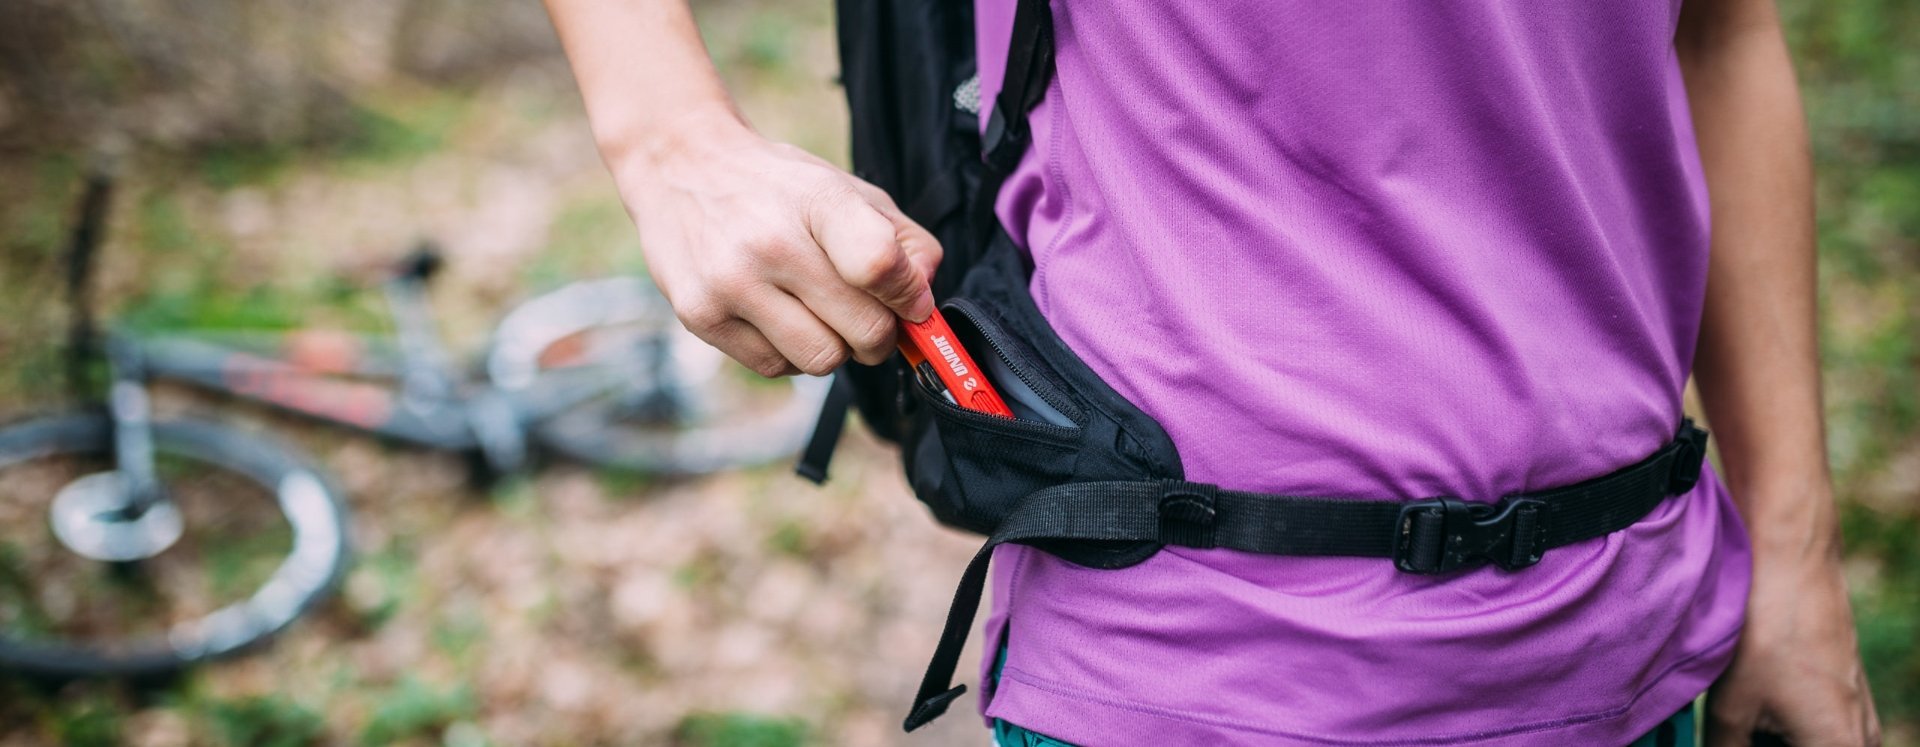 A woman pulls a Unior multitool from her backpack pocket